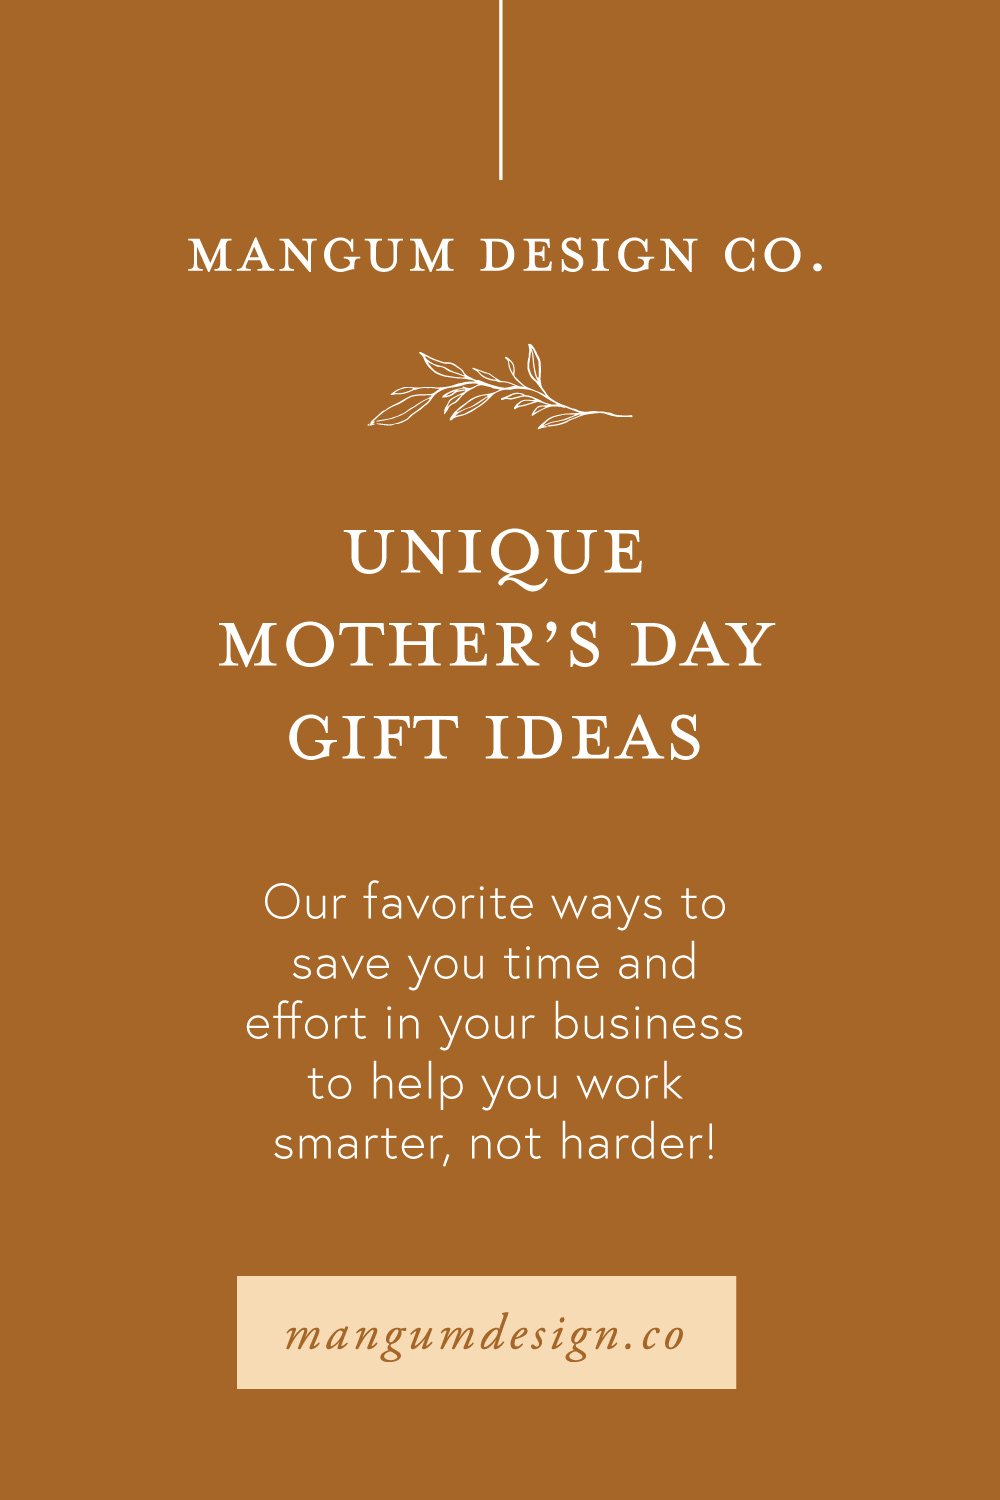  Check out this Mother’s Day Gift Guide if you need gift ideas for Mother’s Day. #mangumdesignco #mothersdaygiftguide #mothersday #giftidea #sentimentalgifts #customgiftideas #customillustrations #personalizedjewelry 